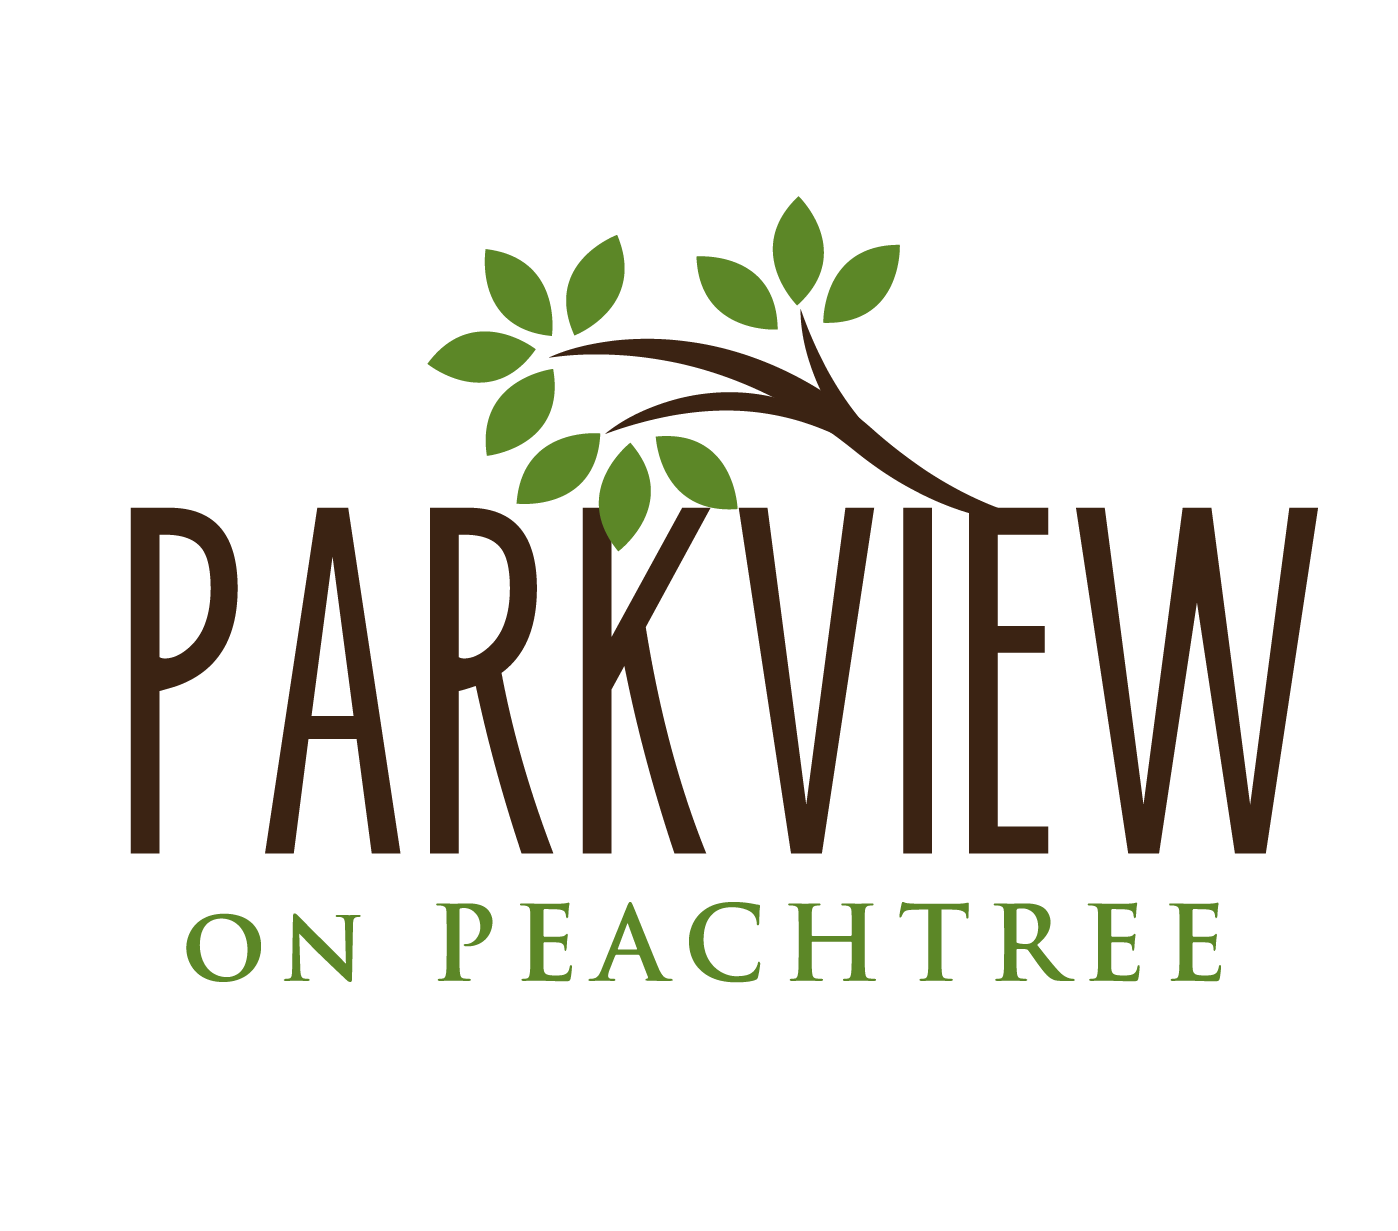 Peachtree Logo - Home - Parkview on Peachtree